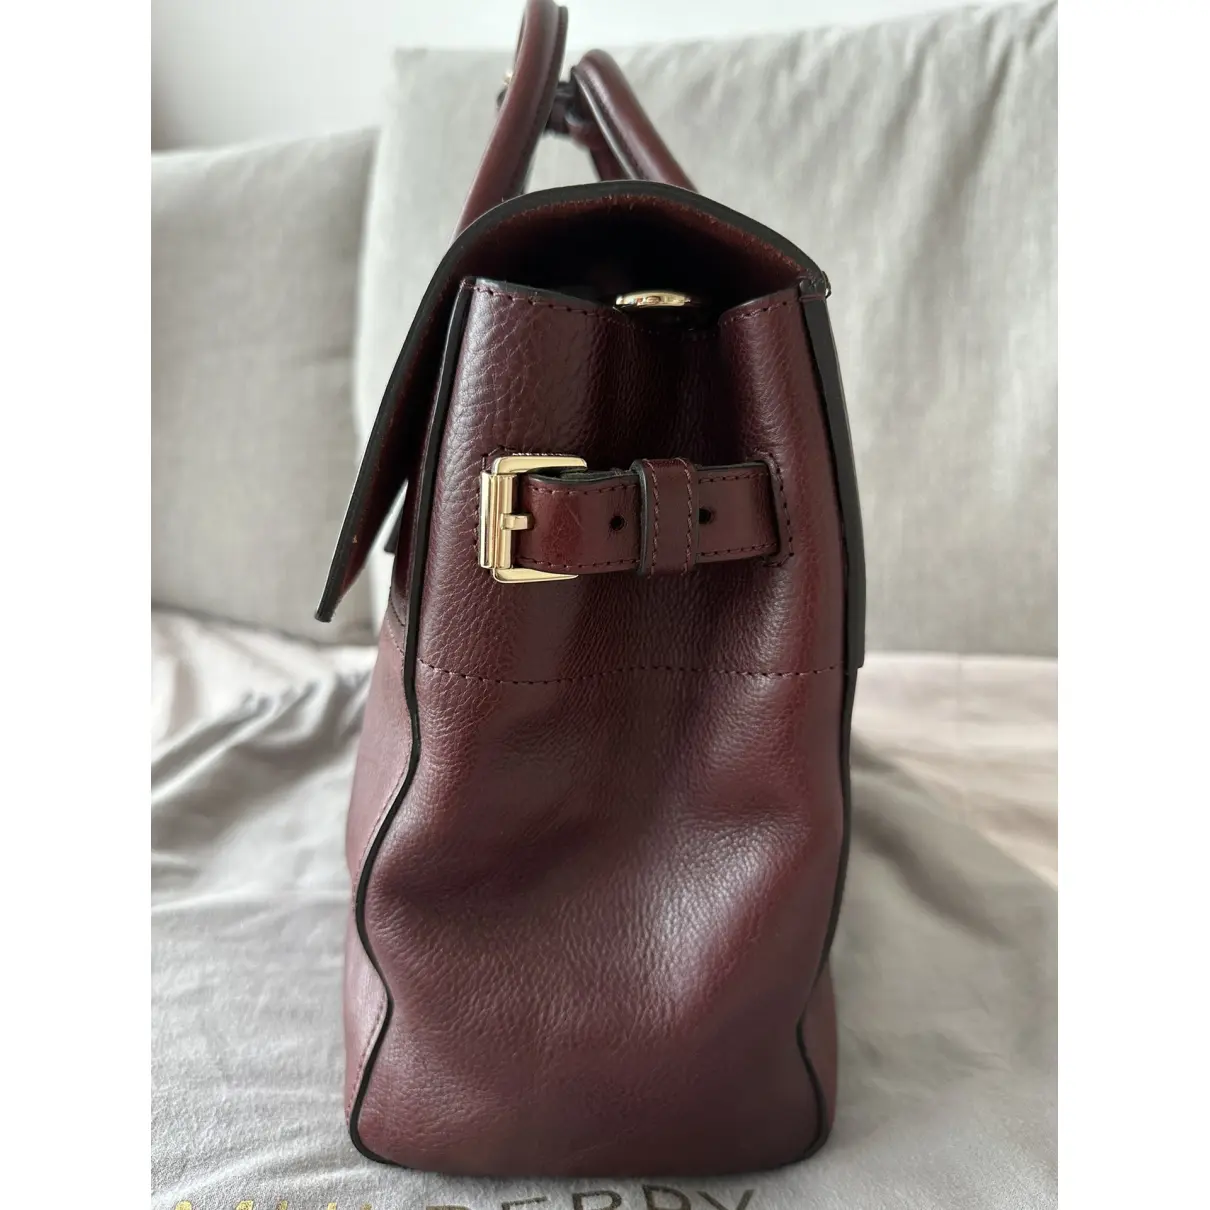 Buy Mulberry Cara Delevigne leather backpack online